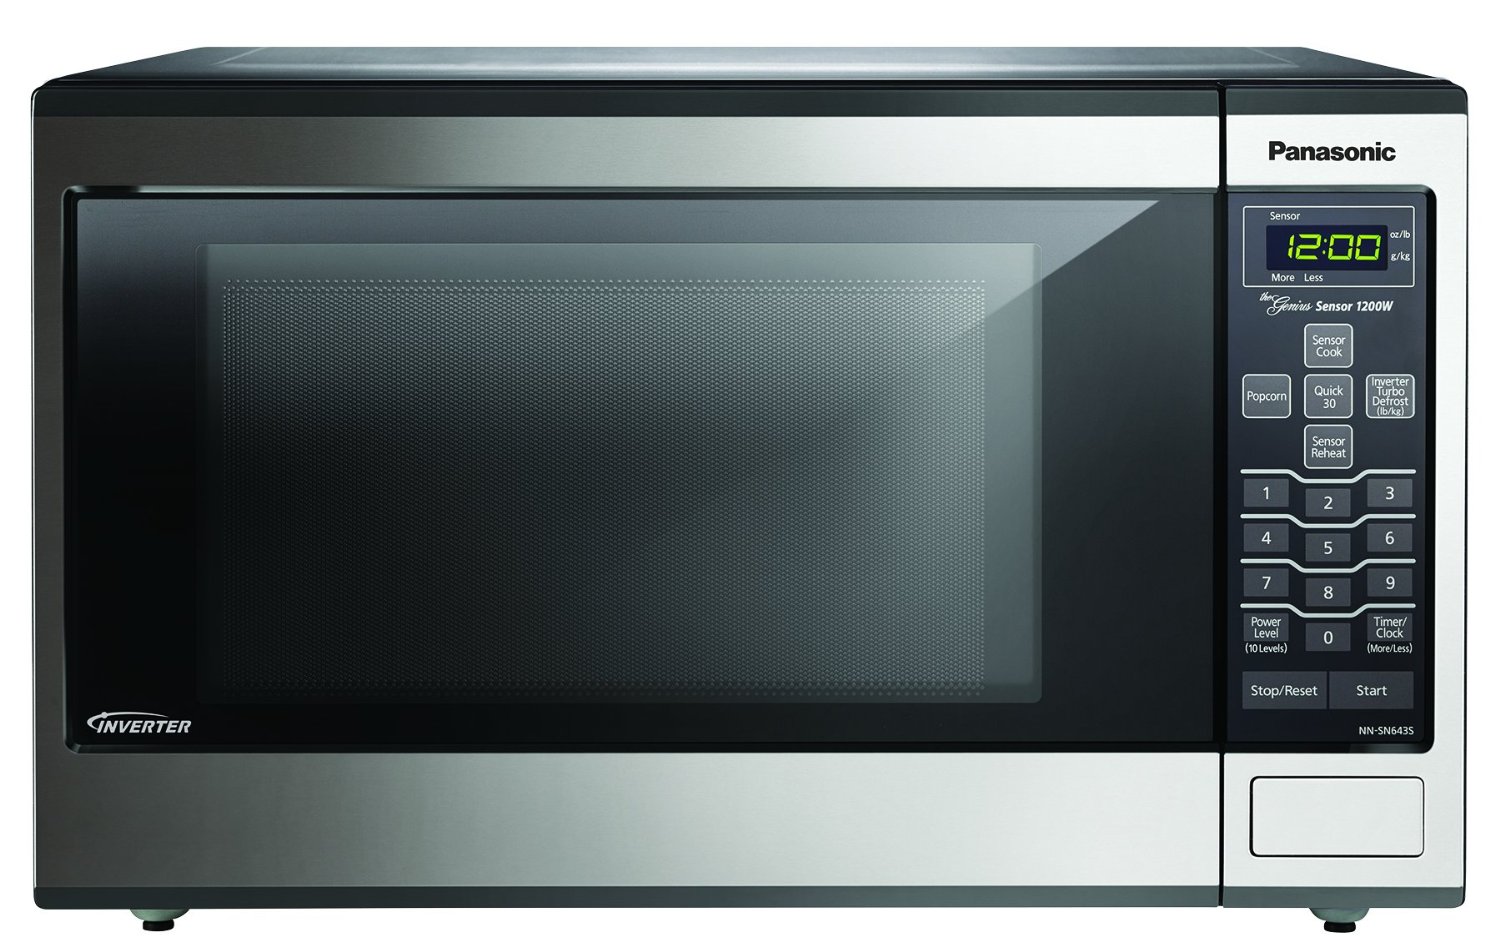 Panasonic NN-SN643S Stainless 1200W 1.2 Cu. Ft. Countertop Microwave Oven with Inverter Technology